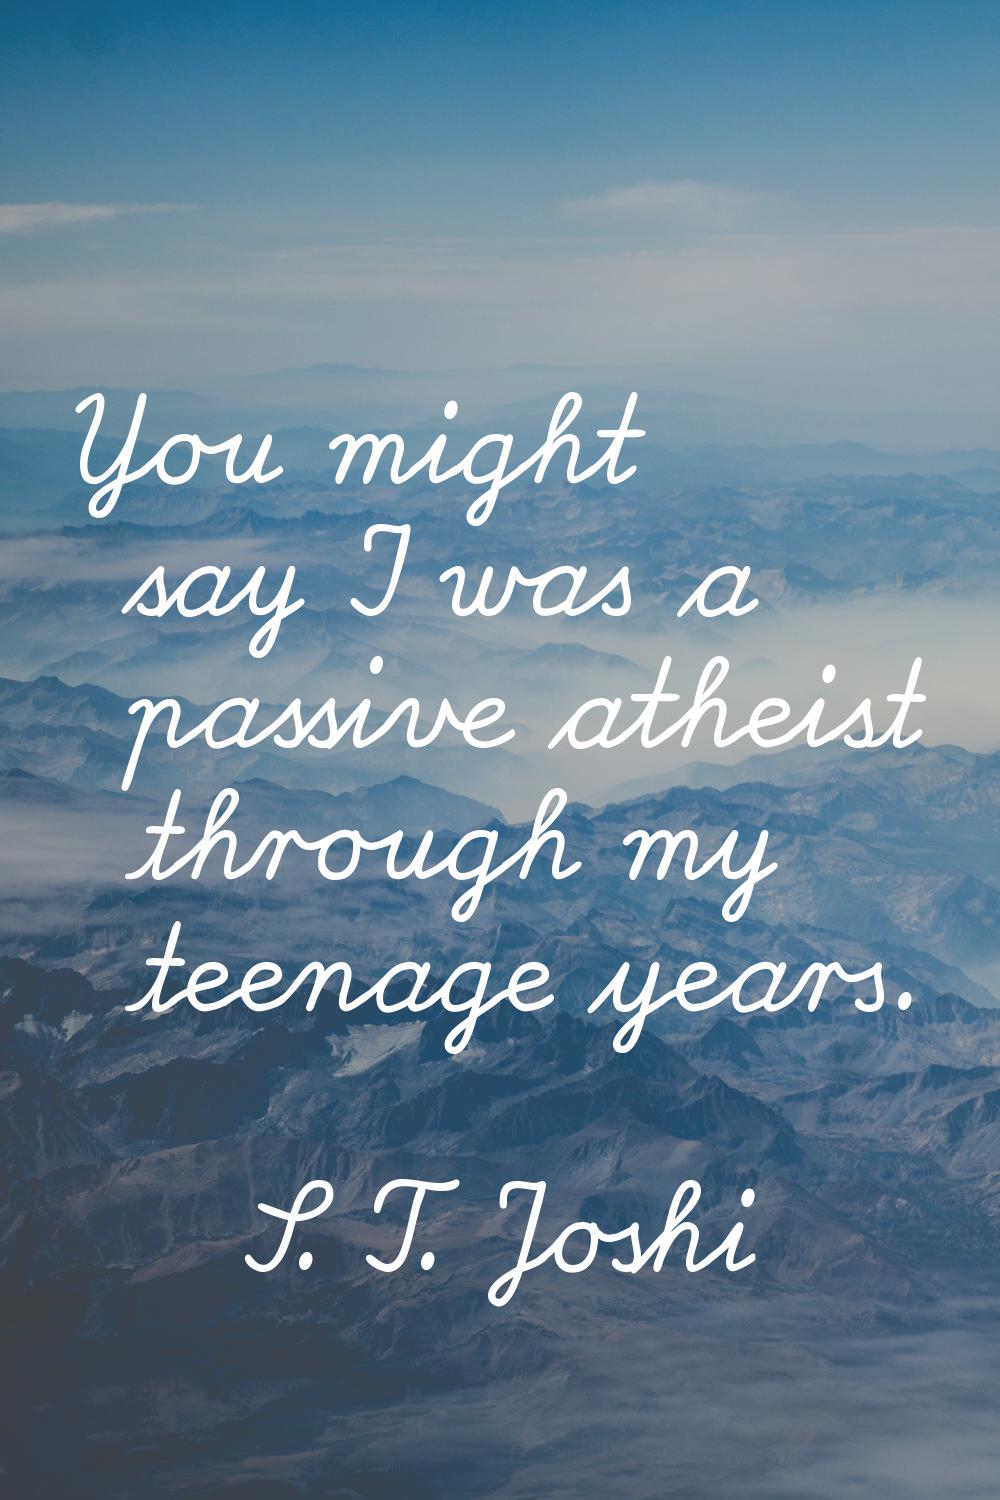 You might say I was a passive atheist through my teenage years.